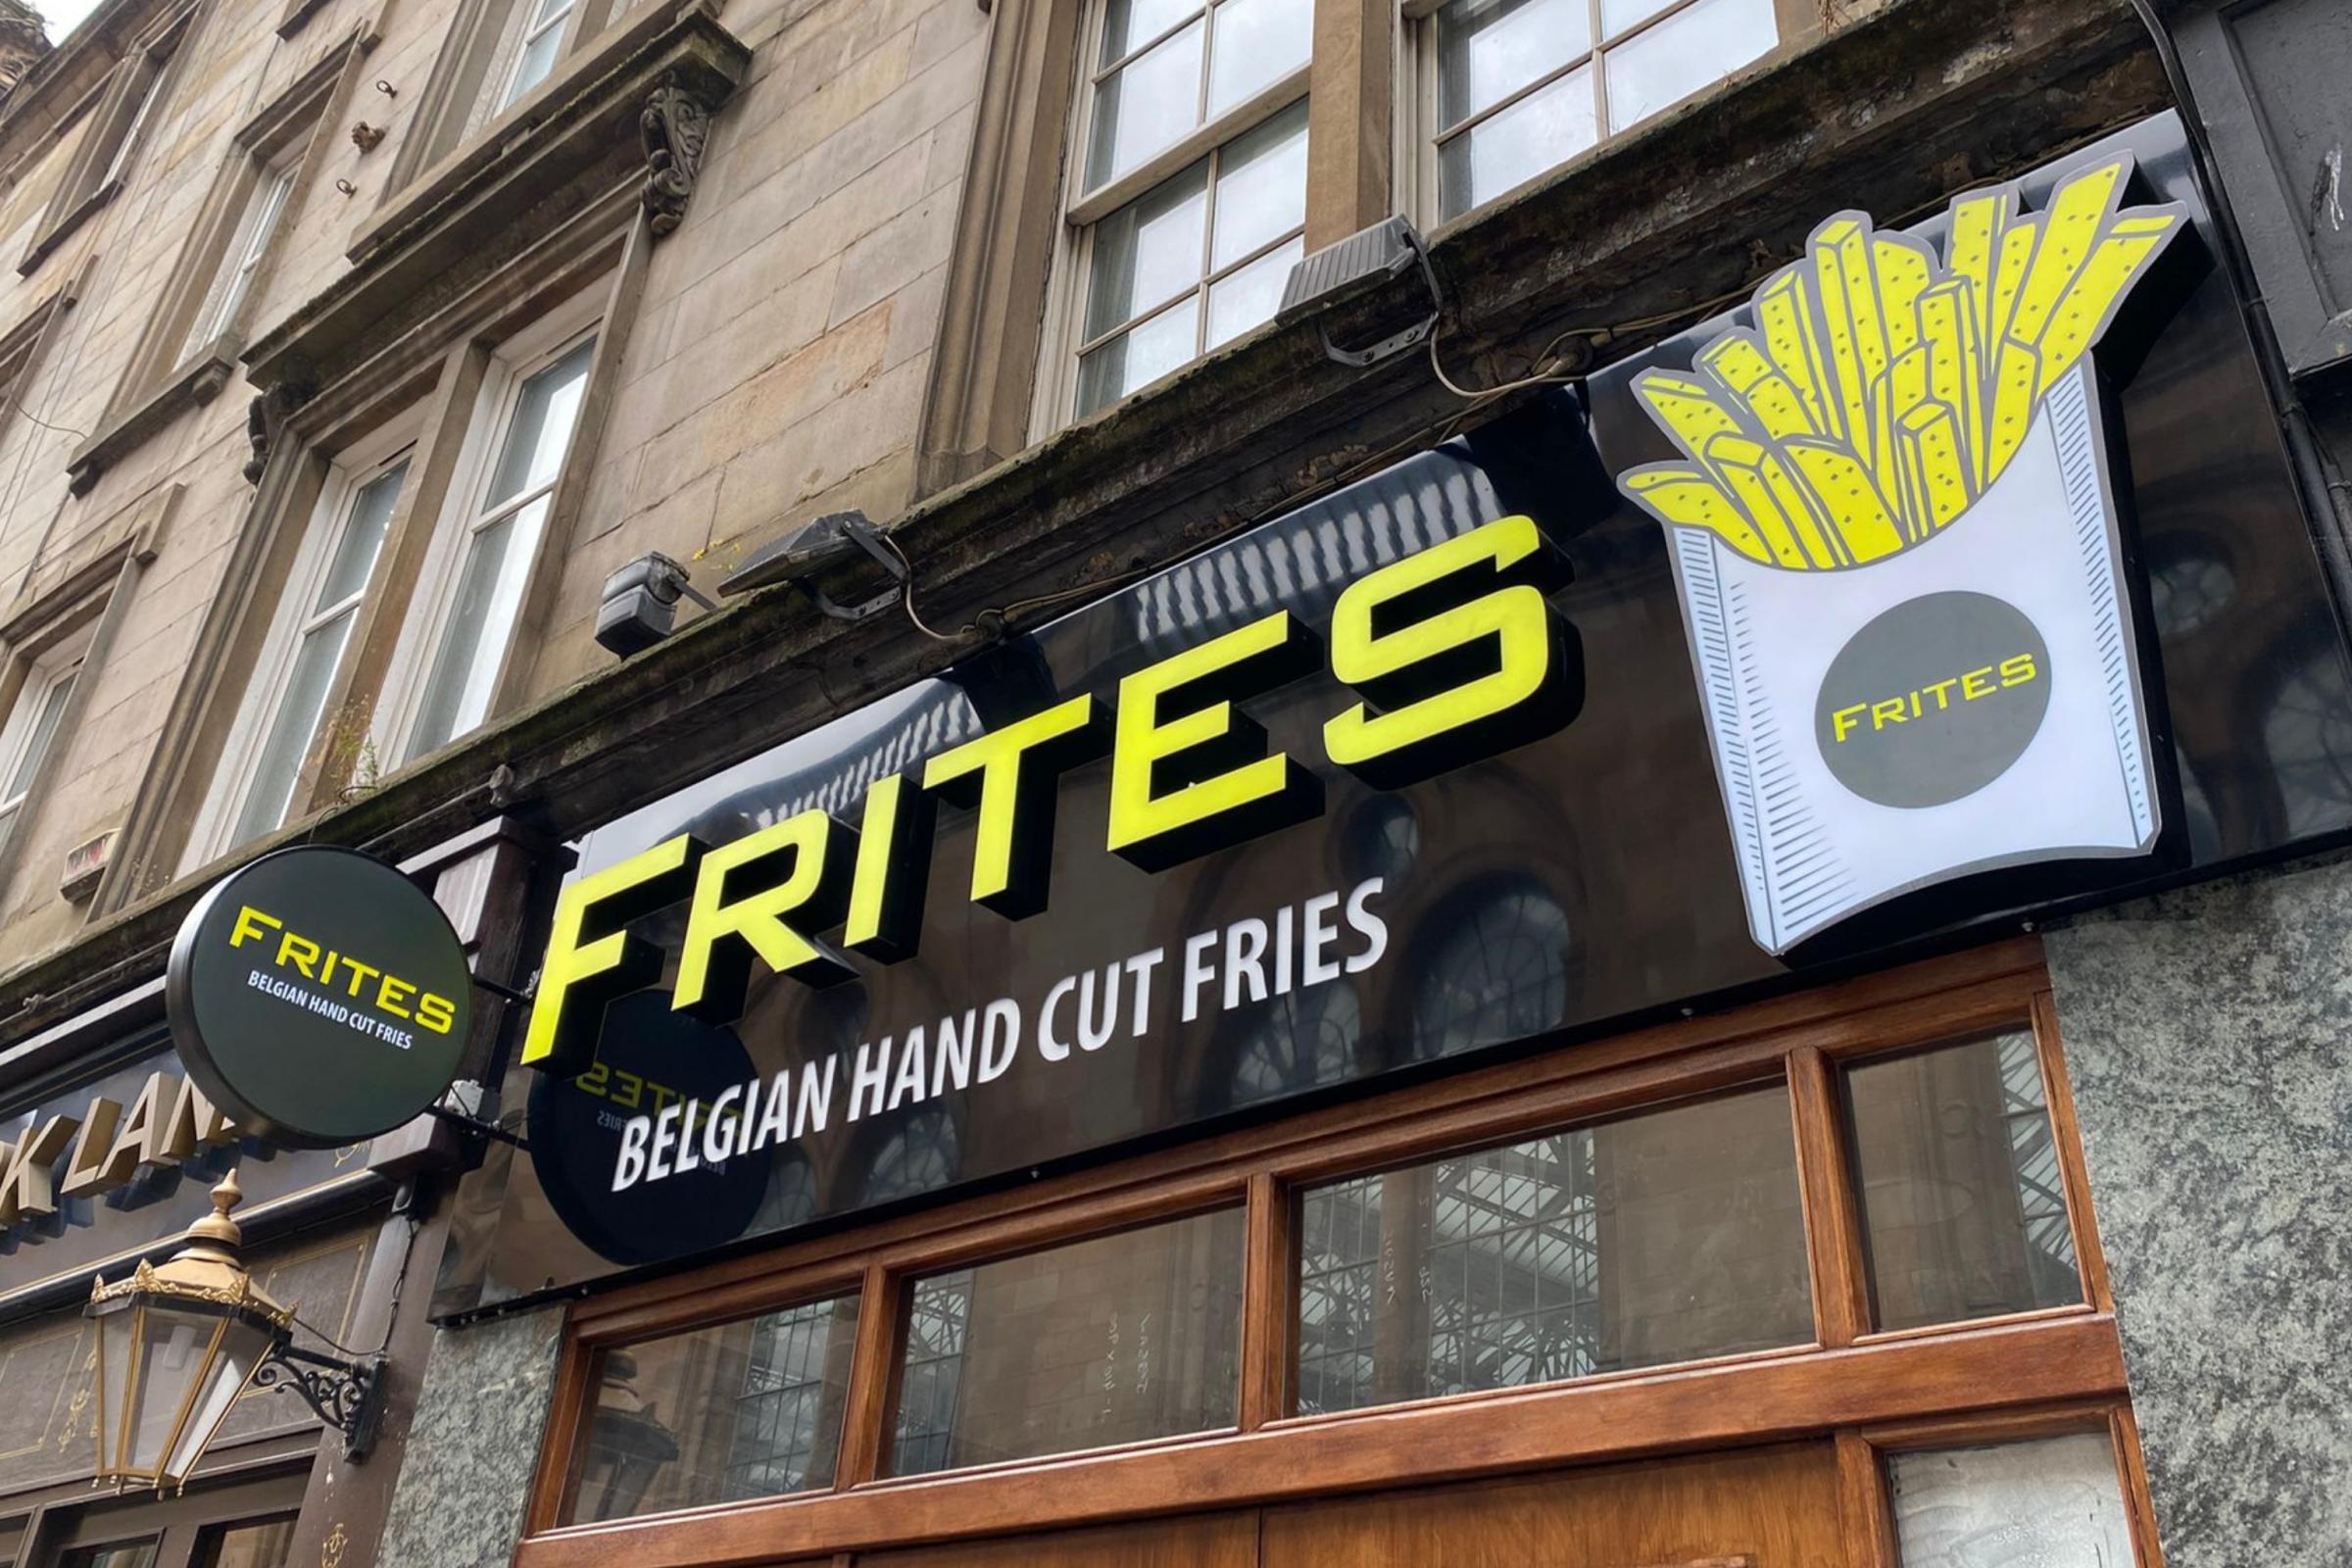 'First of its kind' fast food restaurant Frites opening in Glasgow city centre